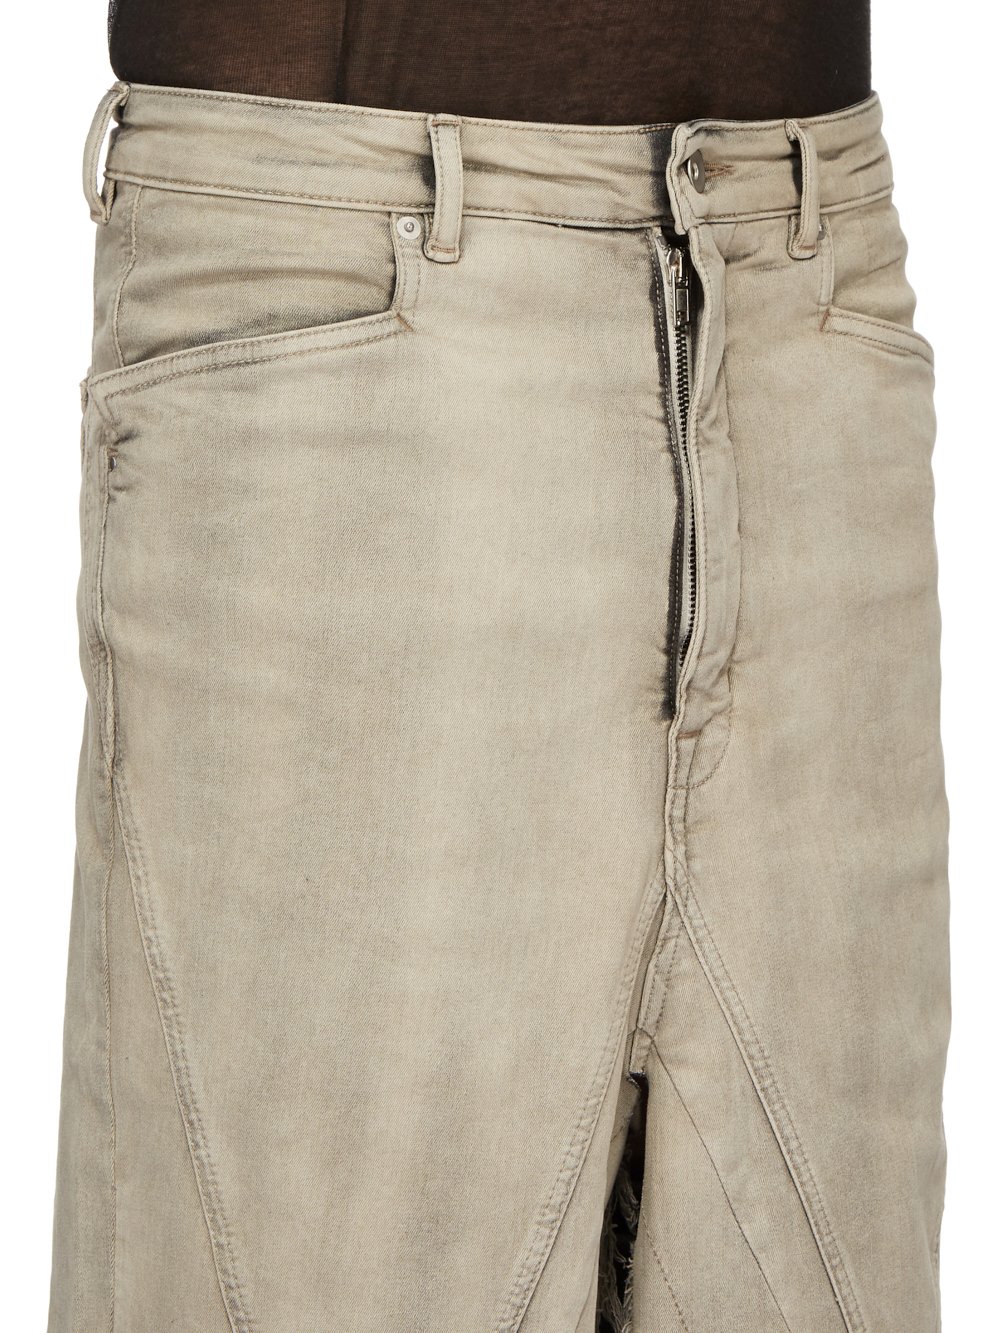 RICK OWENS FW23 LUXOR RUNWAY SLIVERED SKIRT IN MINERAL PEARL STRETCH DENIM FRINGED